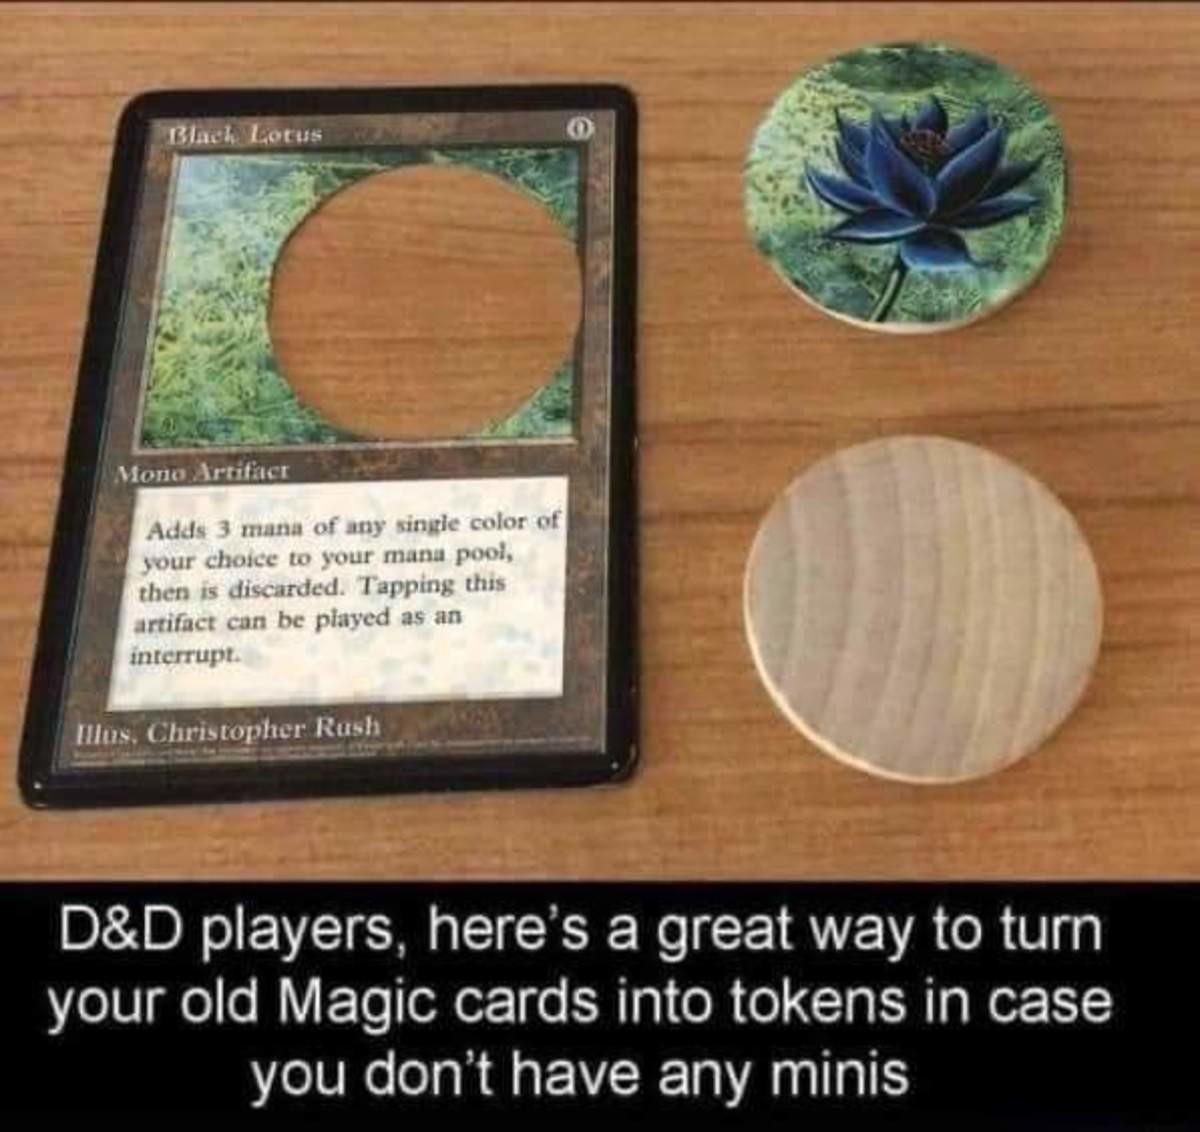 Token black lotus. .. Still fake no matter how many times it gets reposted.